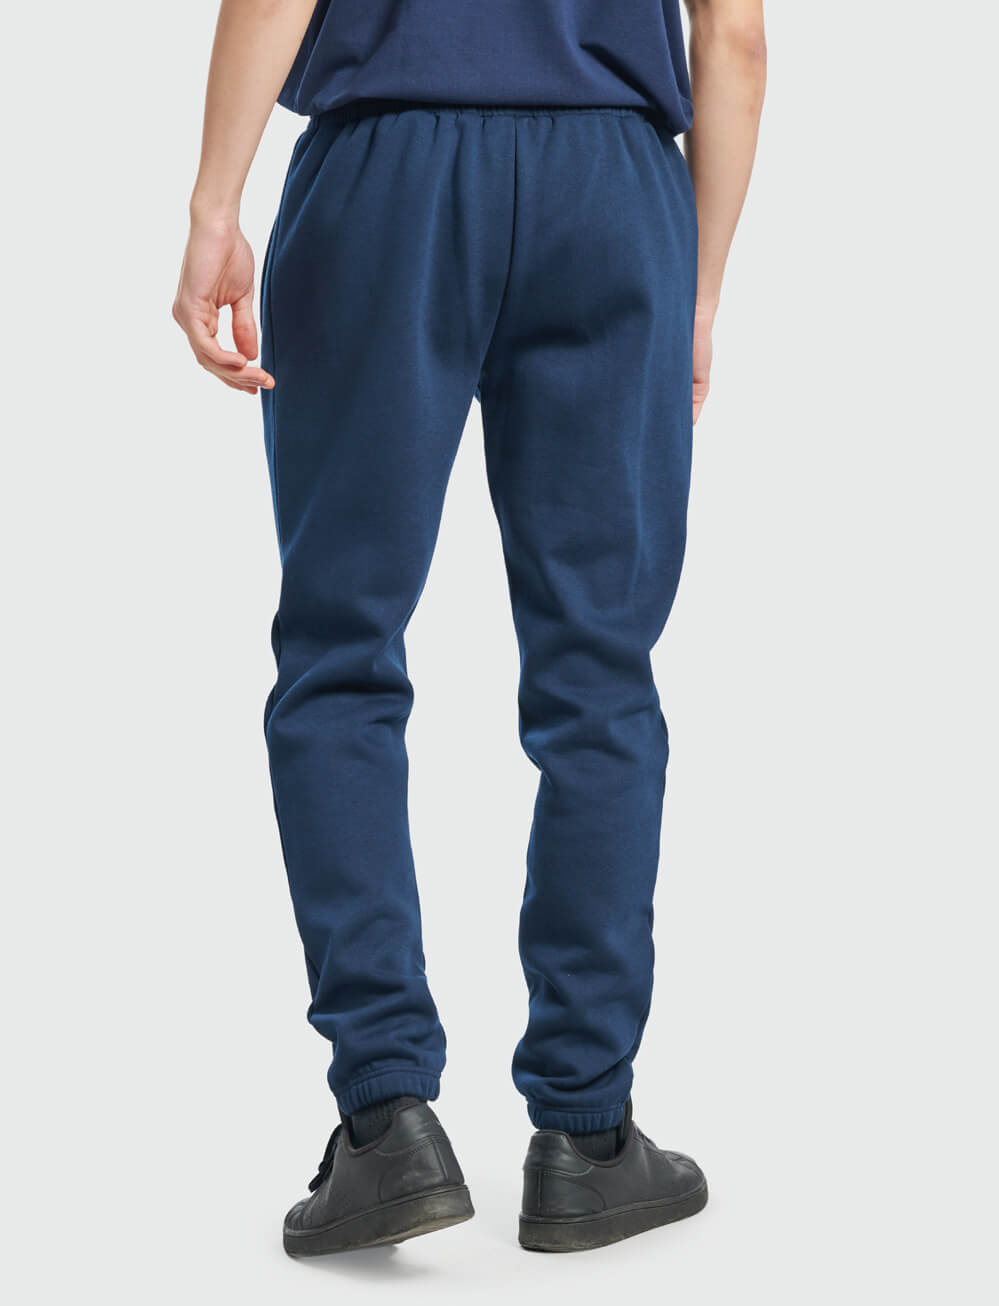 Official Arsenal Joggers - Navy - The World Football Store